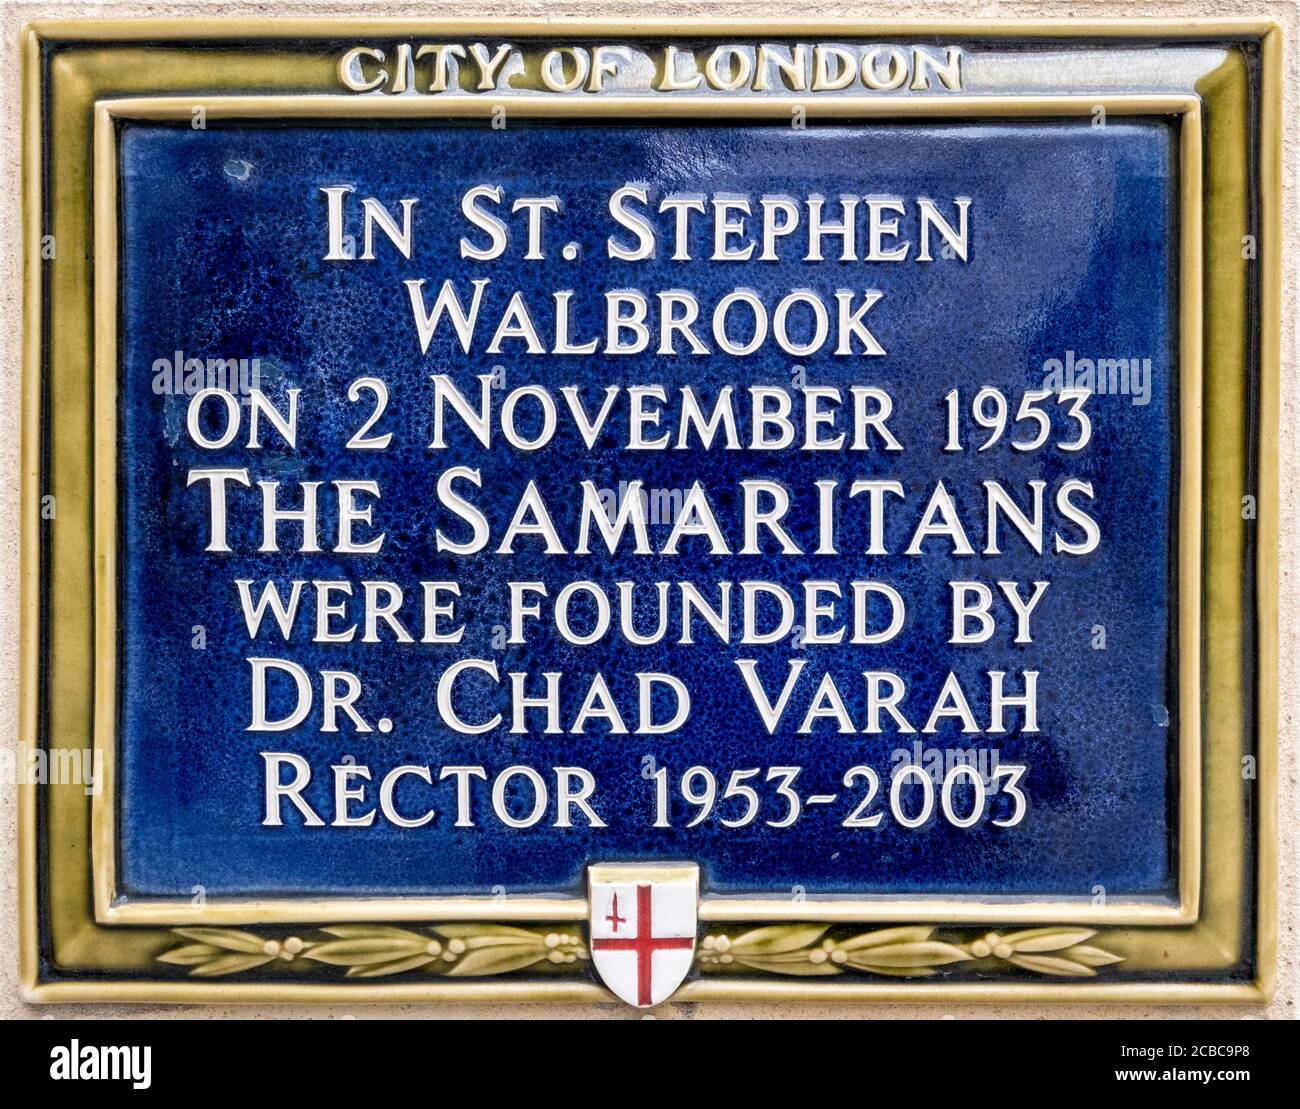 Plaque to commemorate the founding of The Samaritans by Dr Chad Varah in 1953, a UK charity which provides emotional support to people in distress Stock Photo